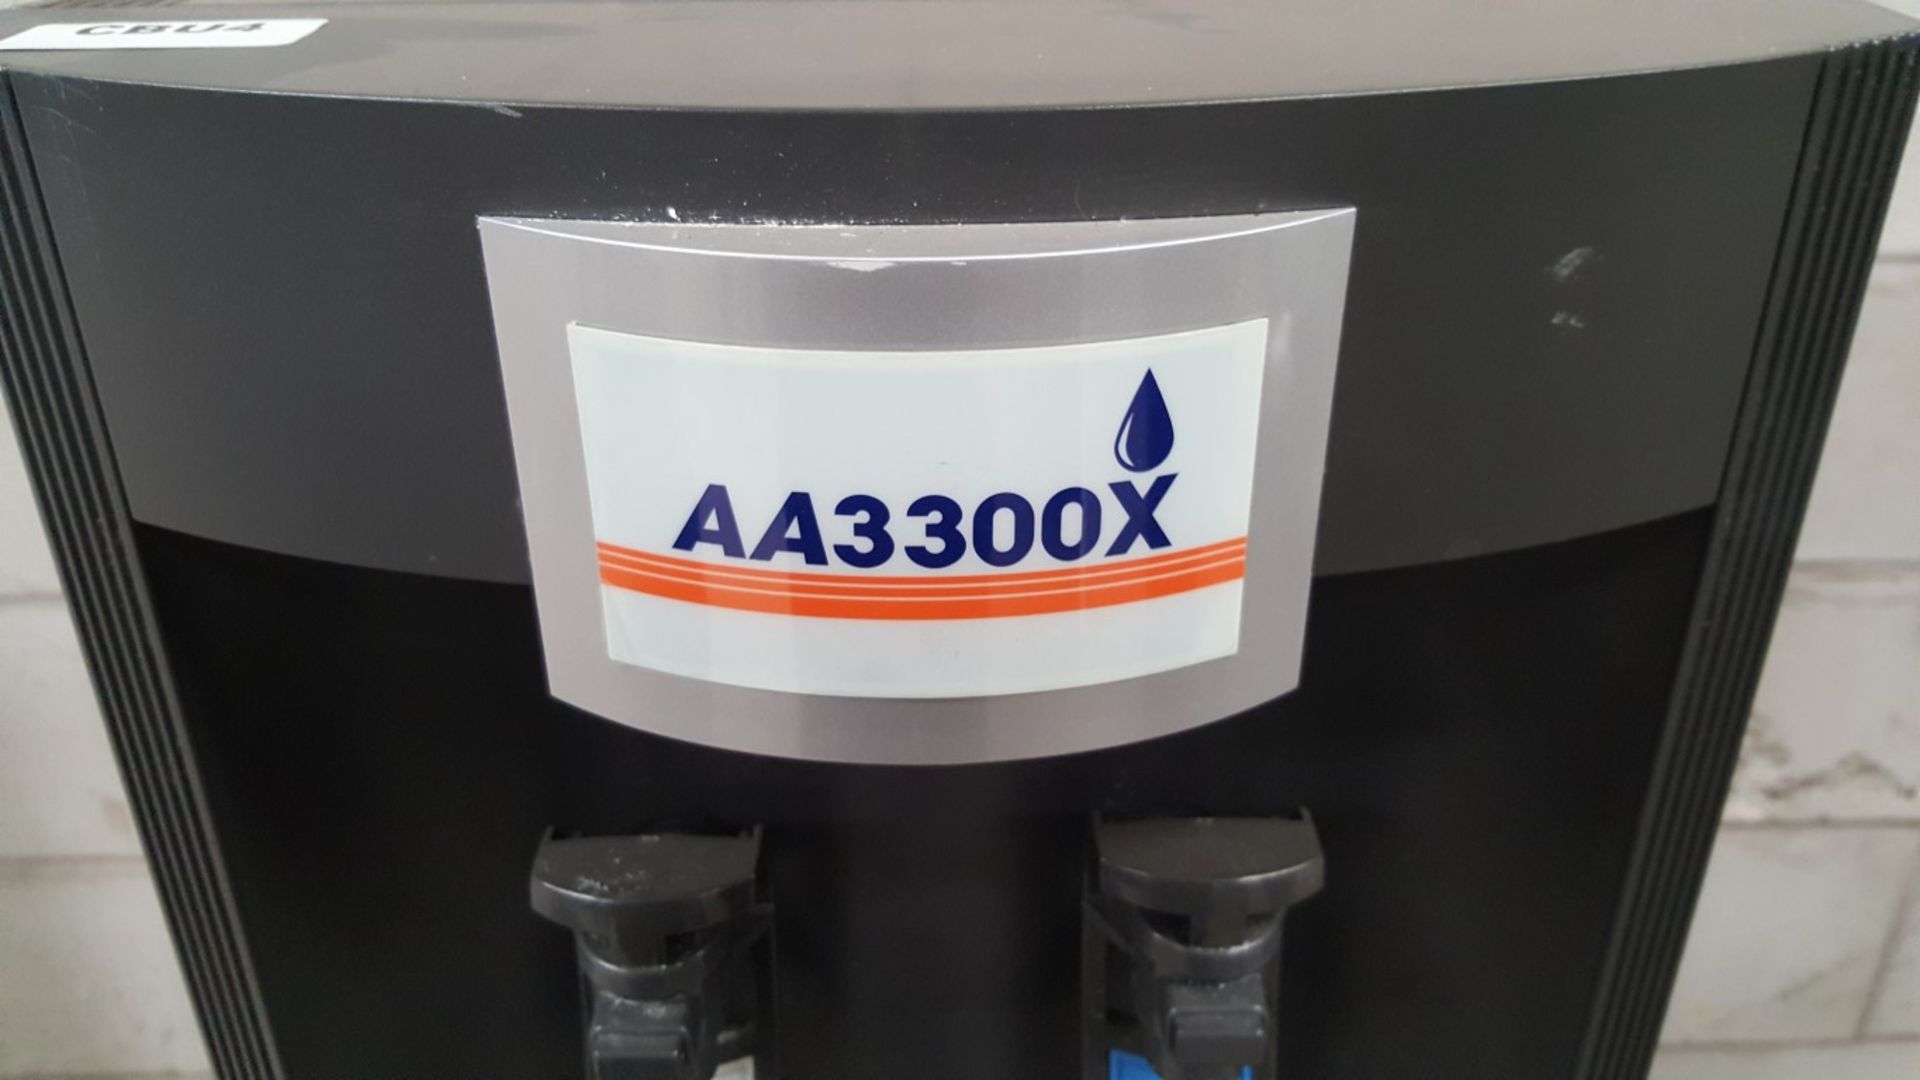 1 x AA FIRST AA3300X FLOOR STANDING MAINS FED WATER COOLER - CL011 - CBU4 - LOCATION ALTRINCHAM WA14 - Image 5 of 7